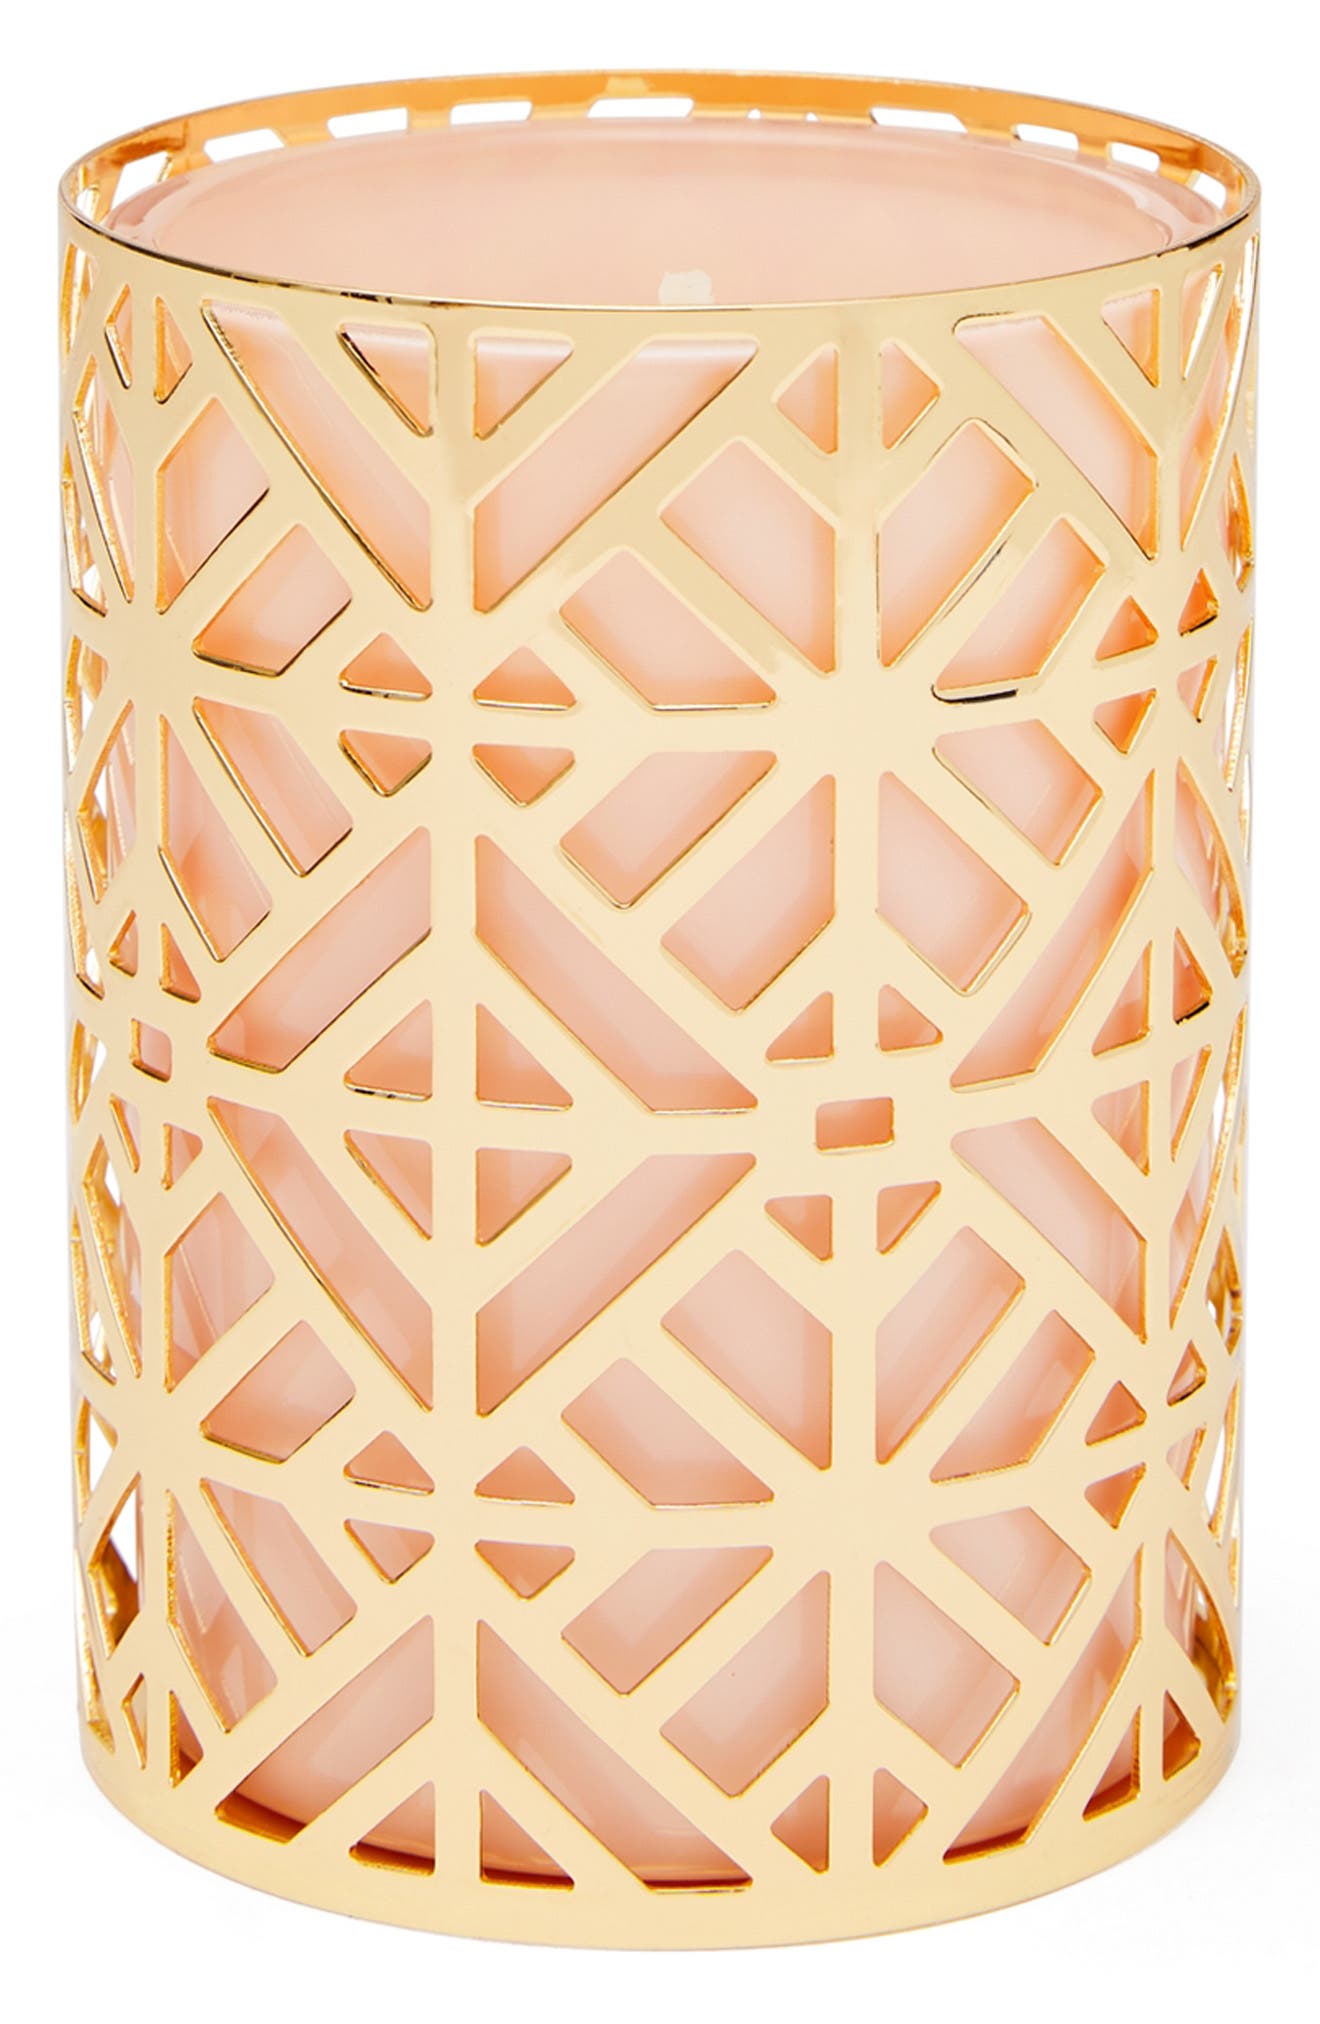 Tory Burch Pink Normandy Rose Candle at Nordstrom